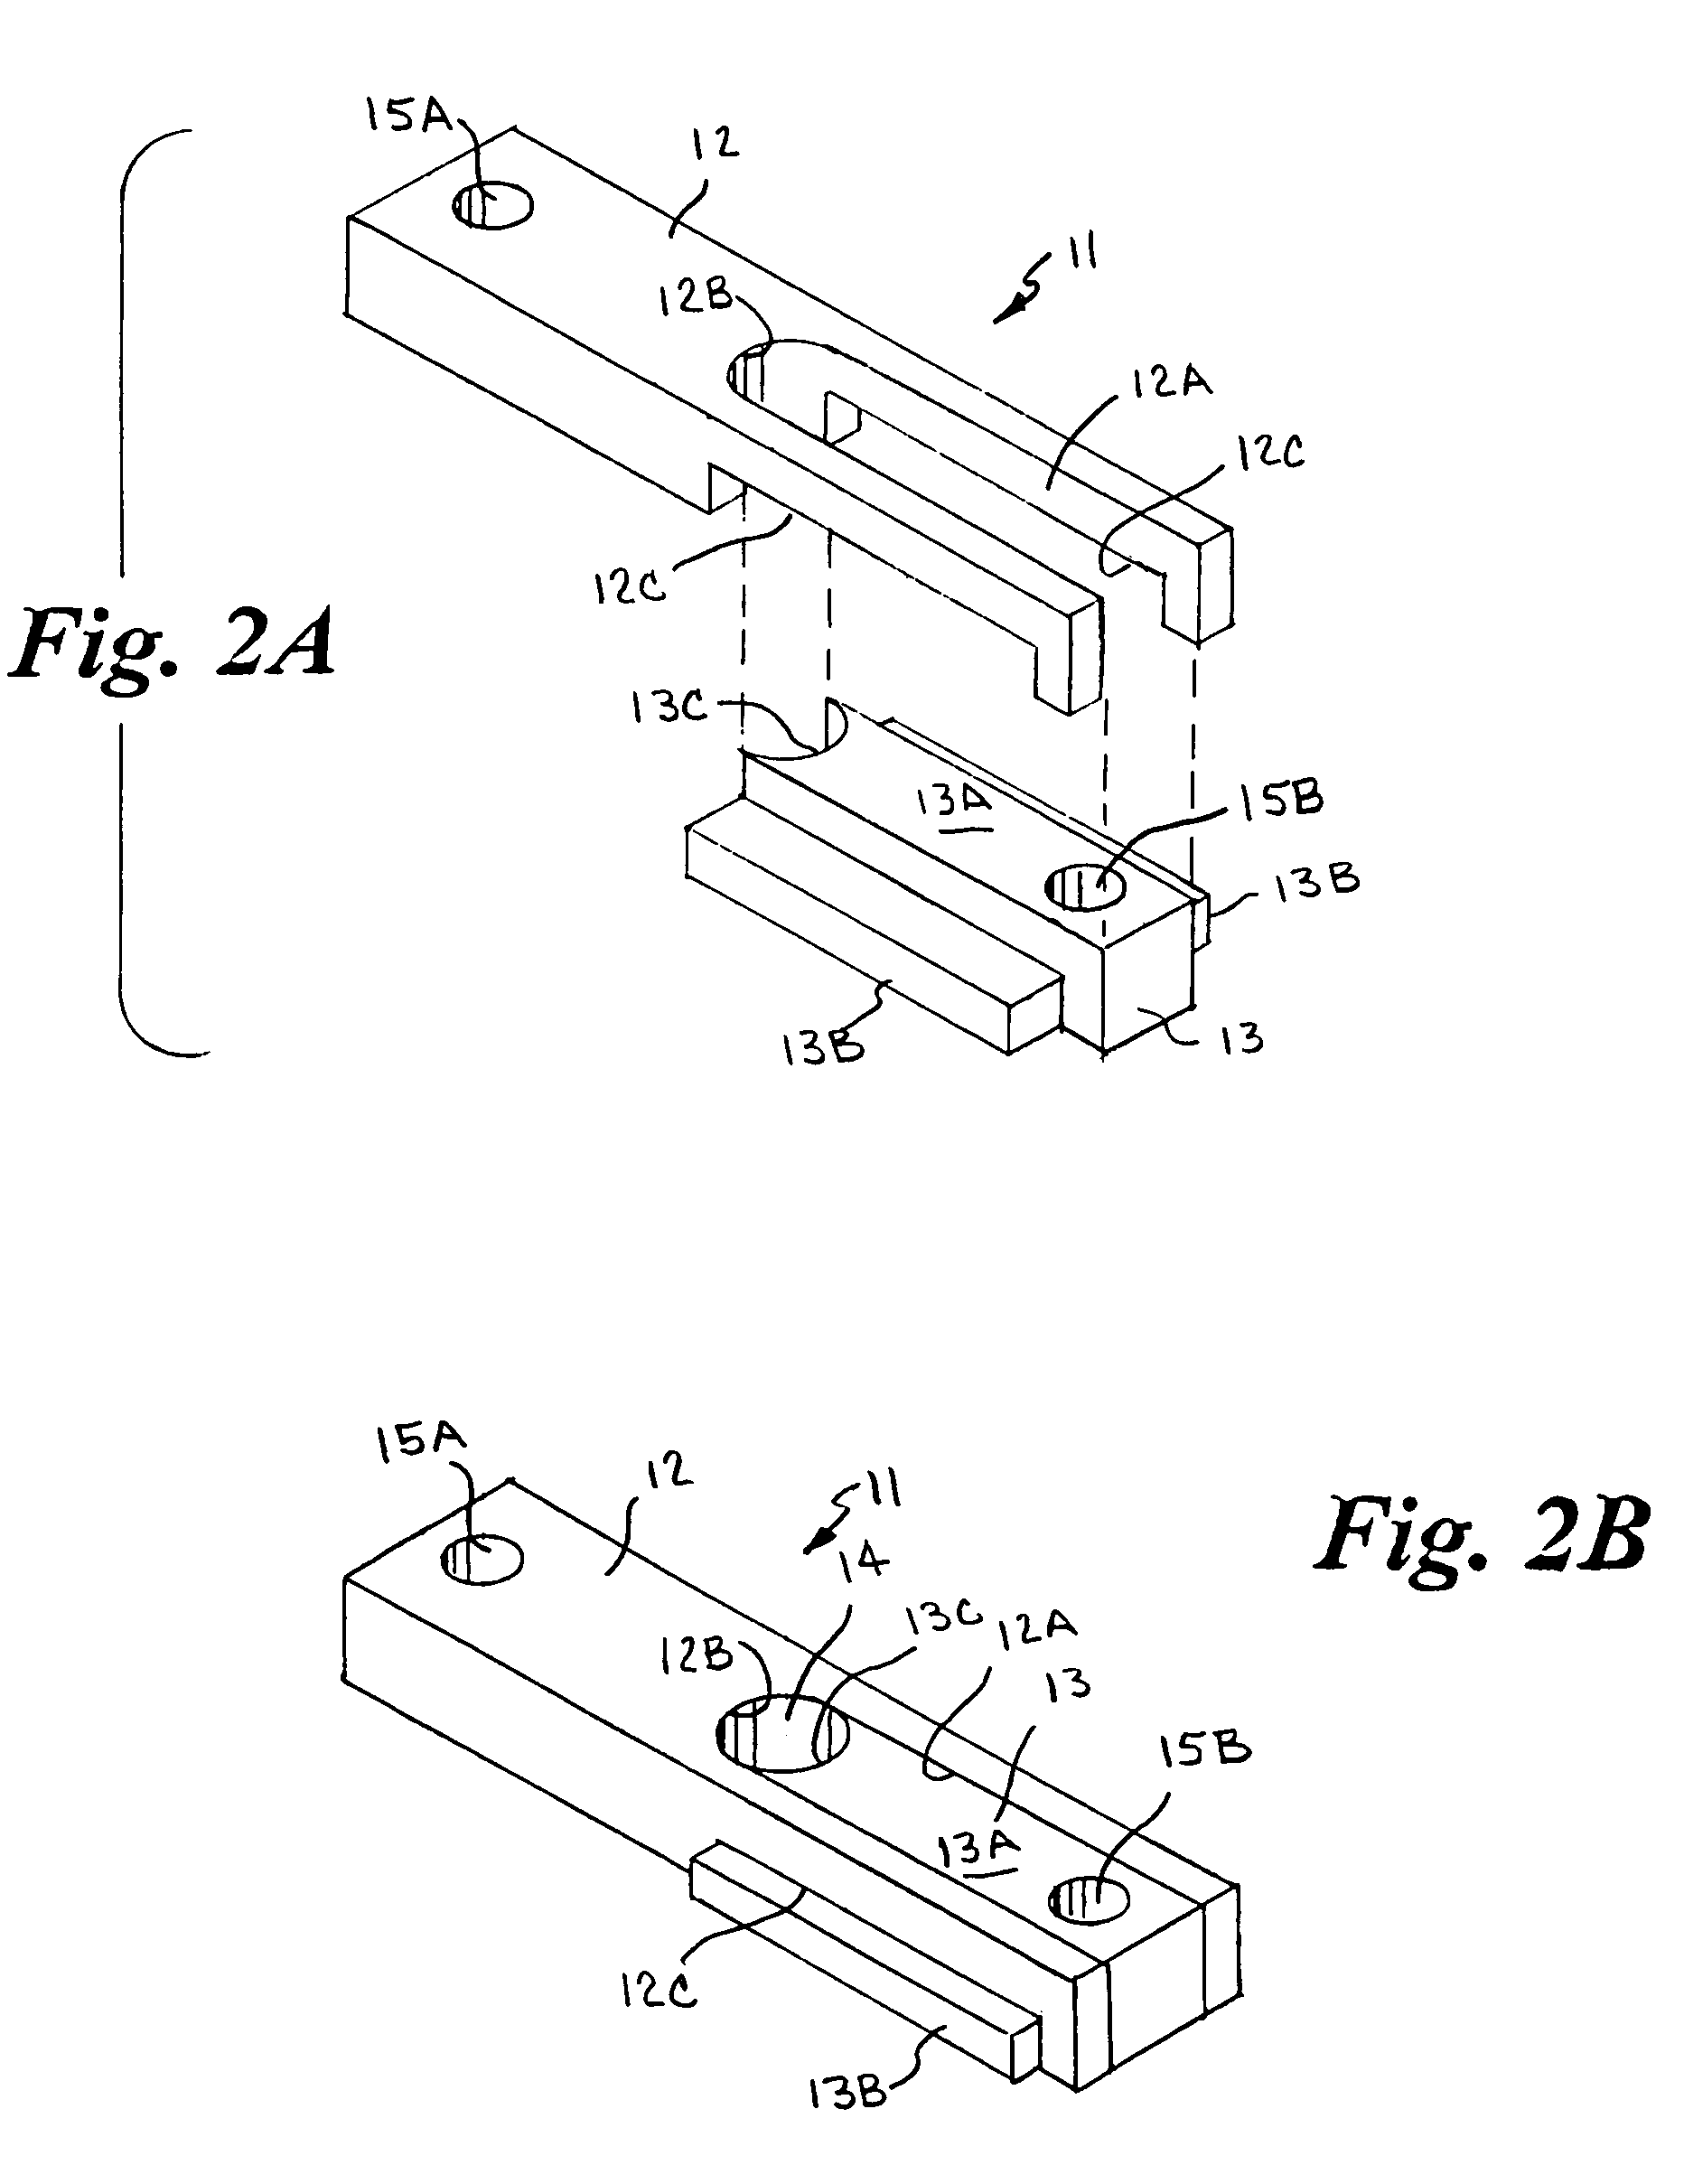 Apparatus and method for measuring tension in guy wires